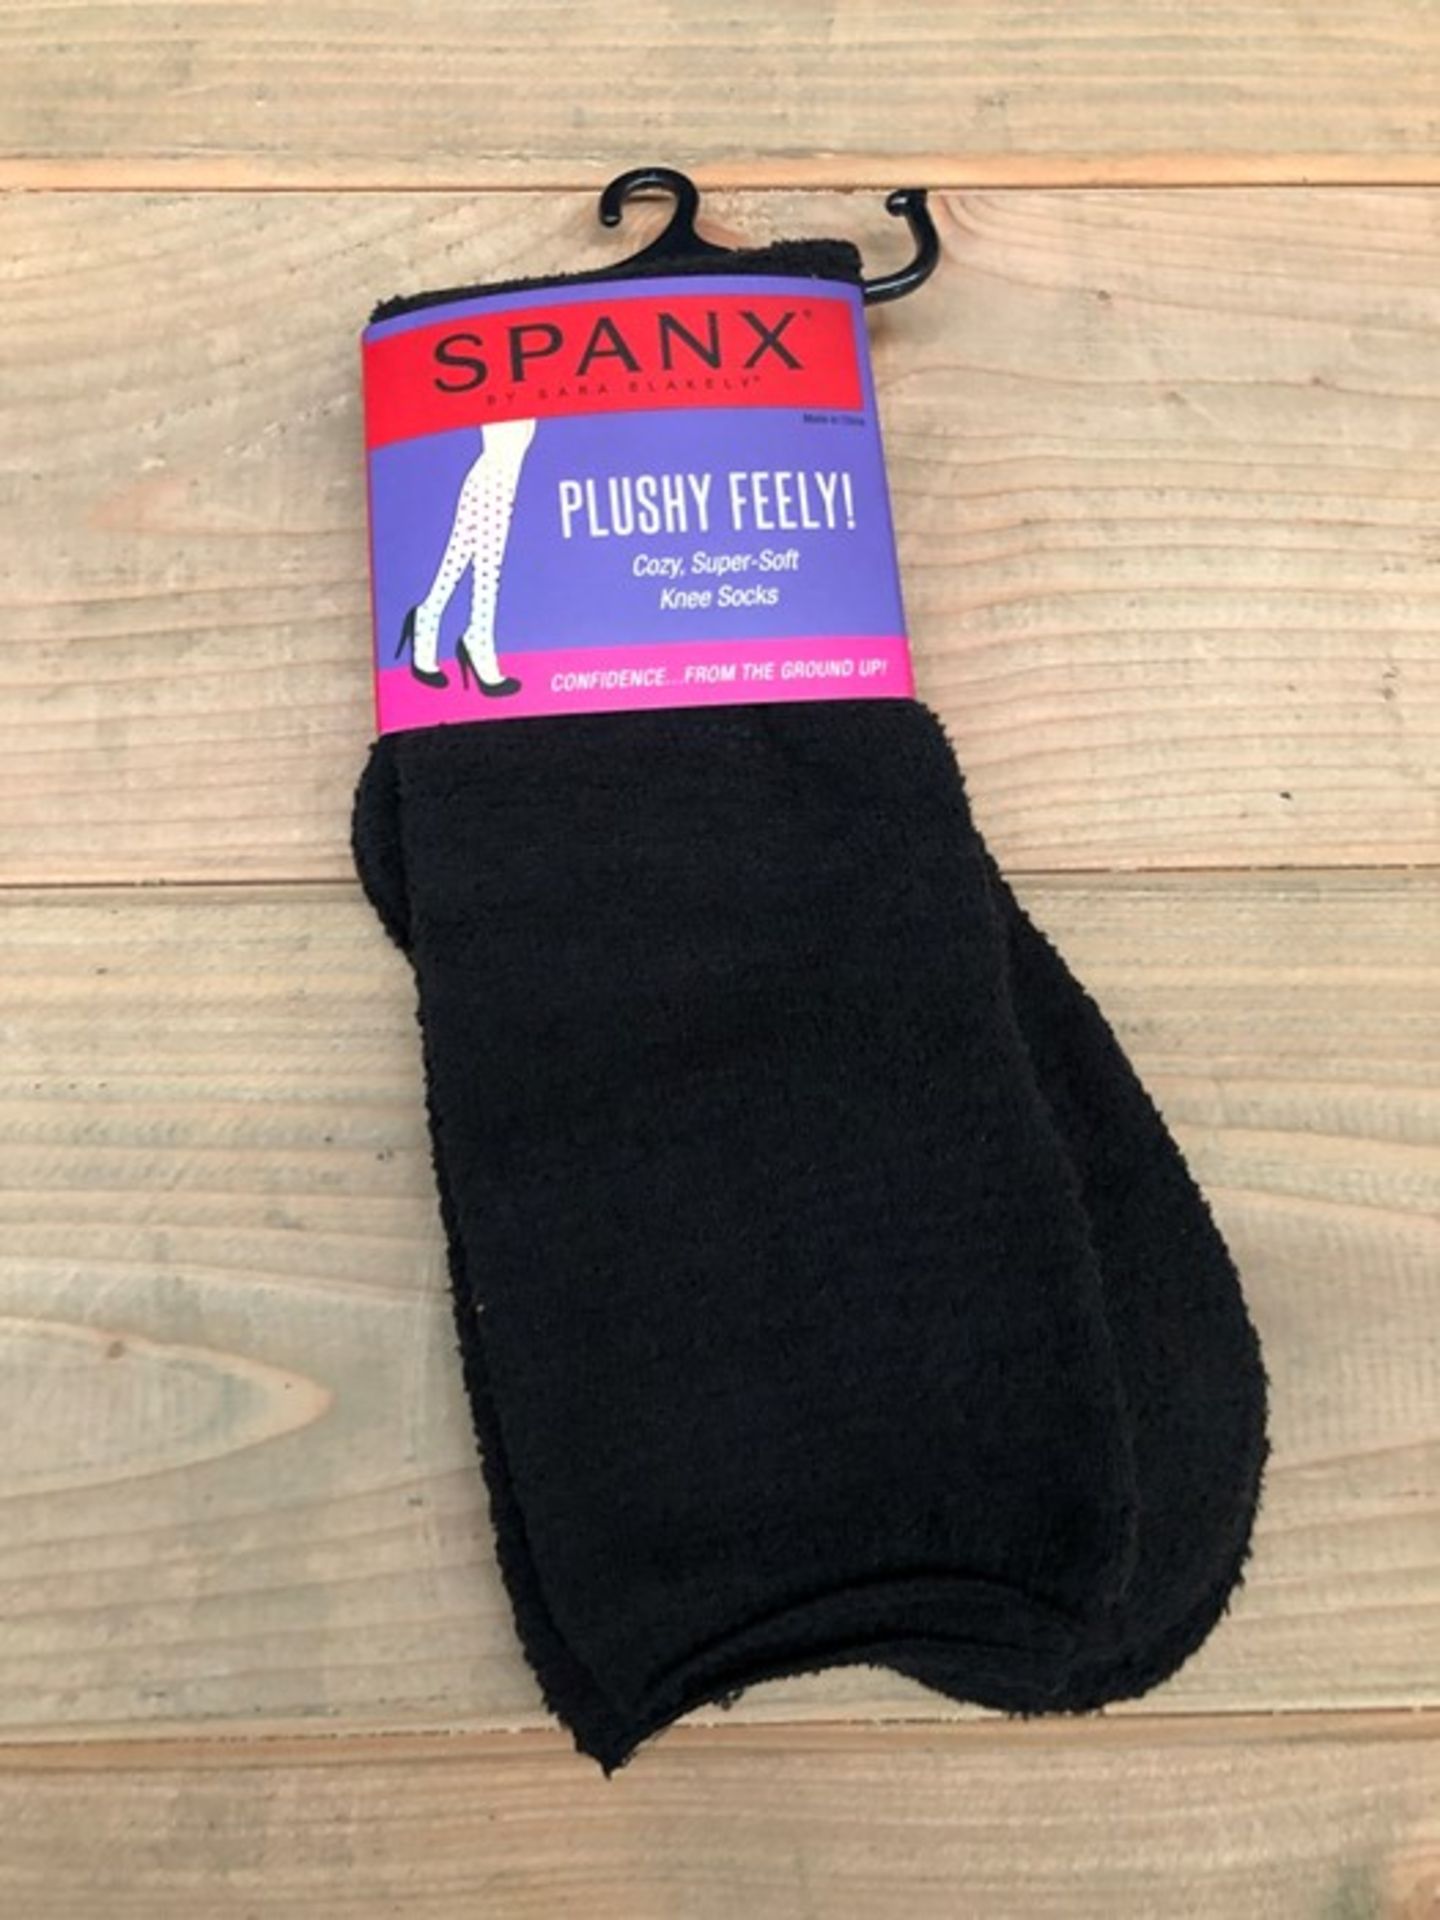 1 LOT TO CONTAIN 50 SPANX SOCKS IN BLACK / SIZE REGULAR / STYLE 2080 / RRP £900.00 (PUBLIC VIEWING